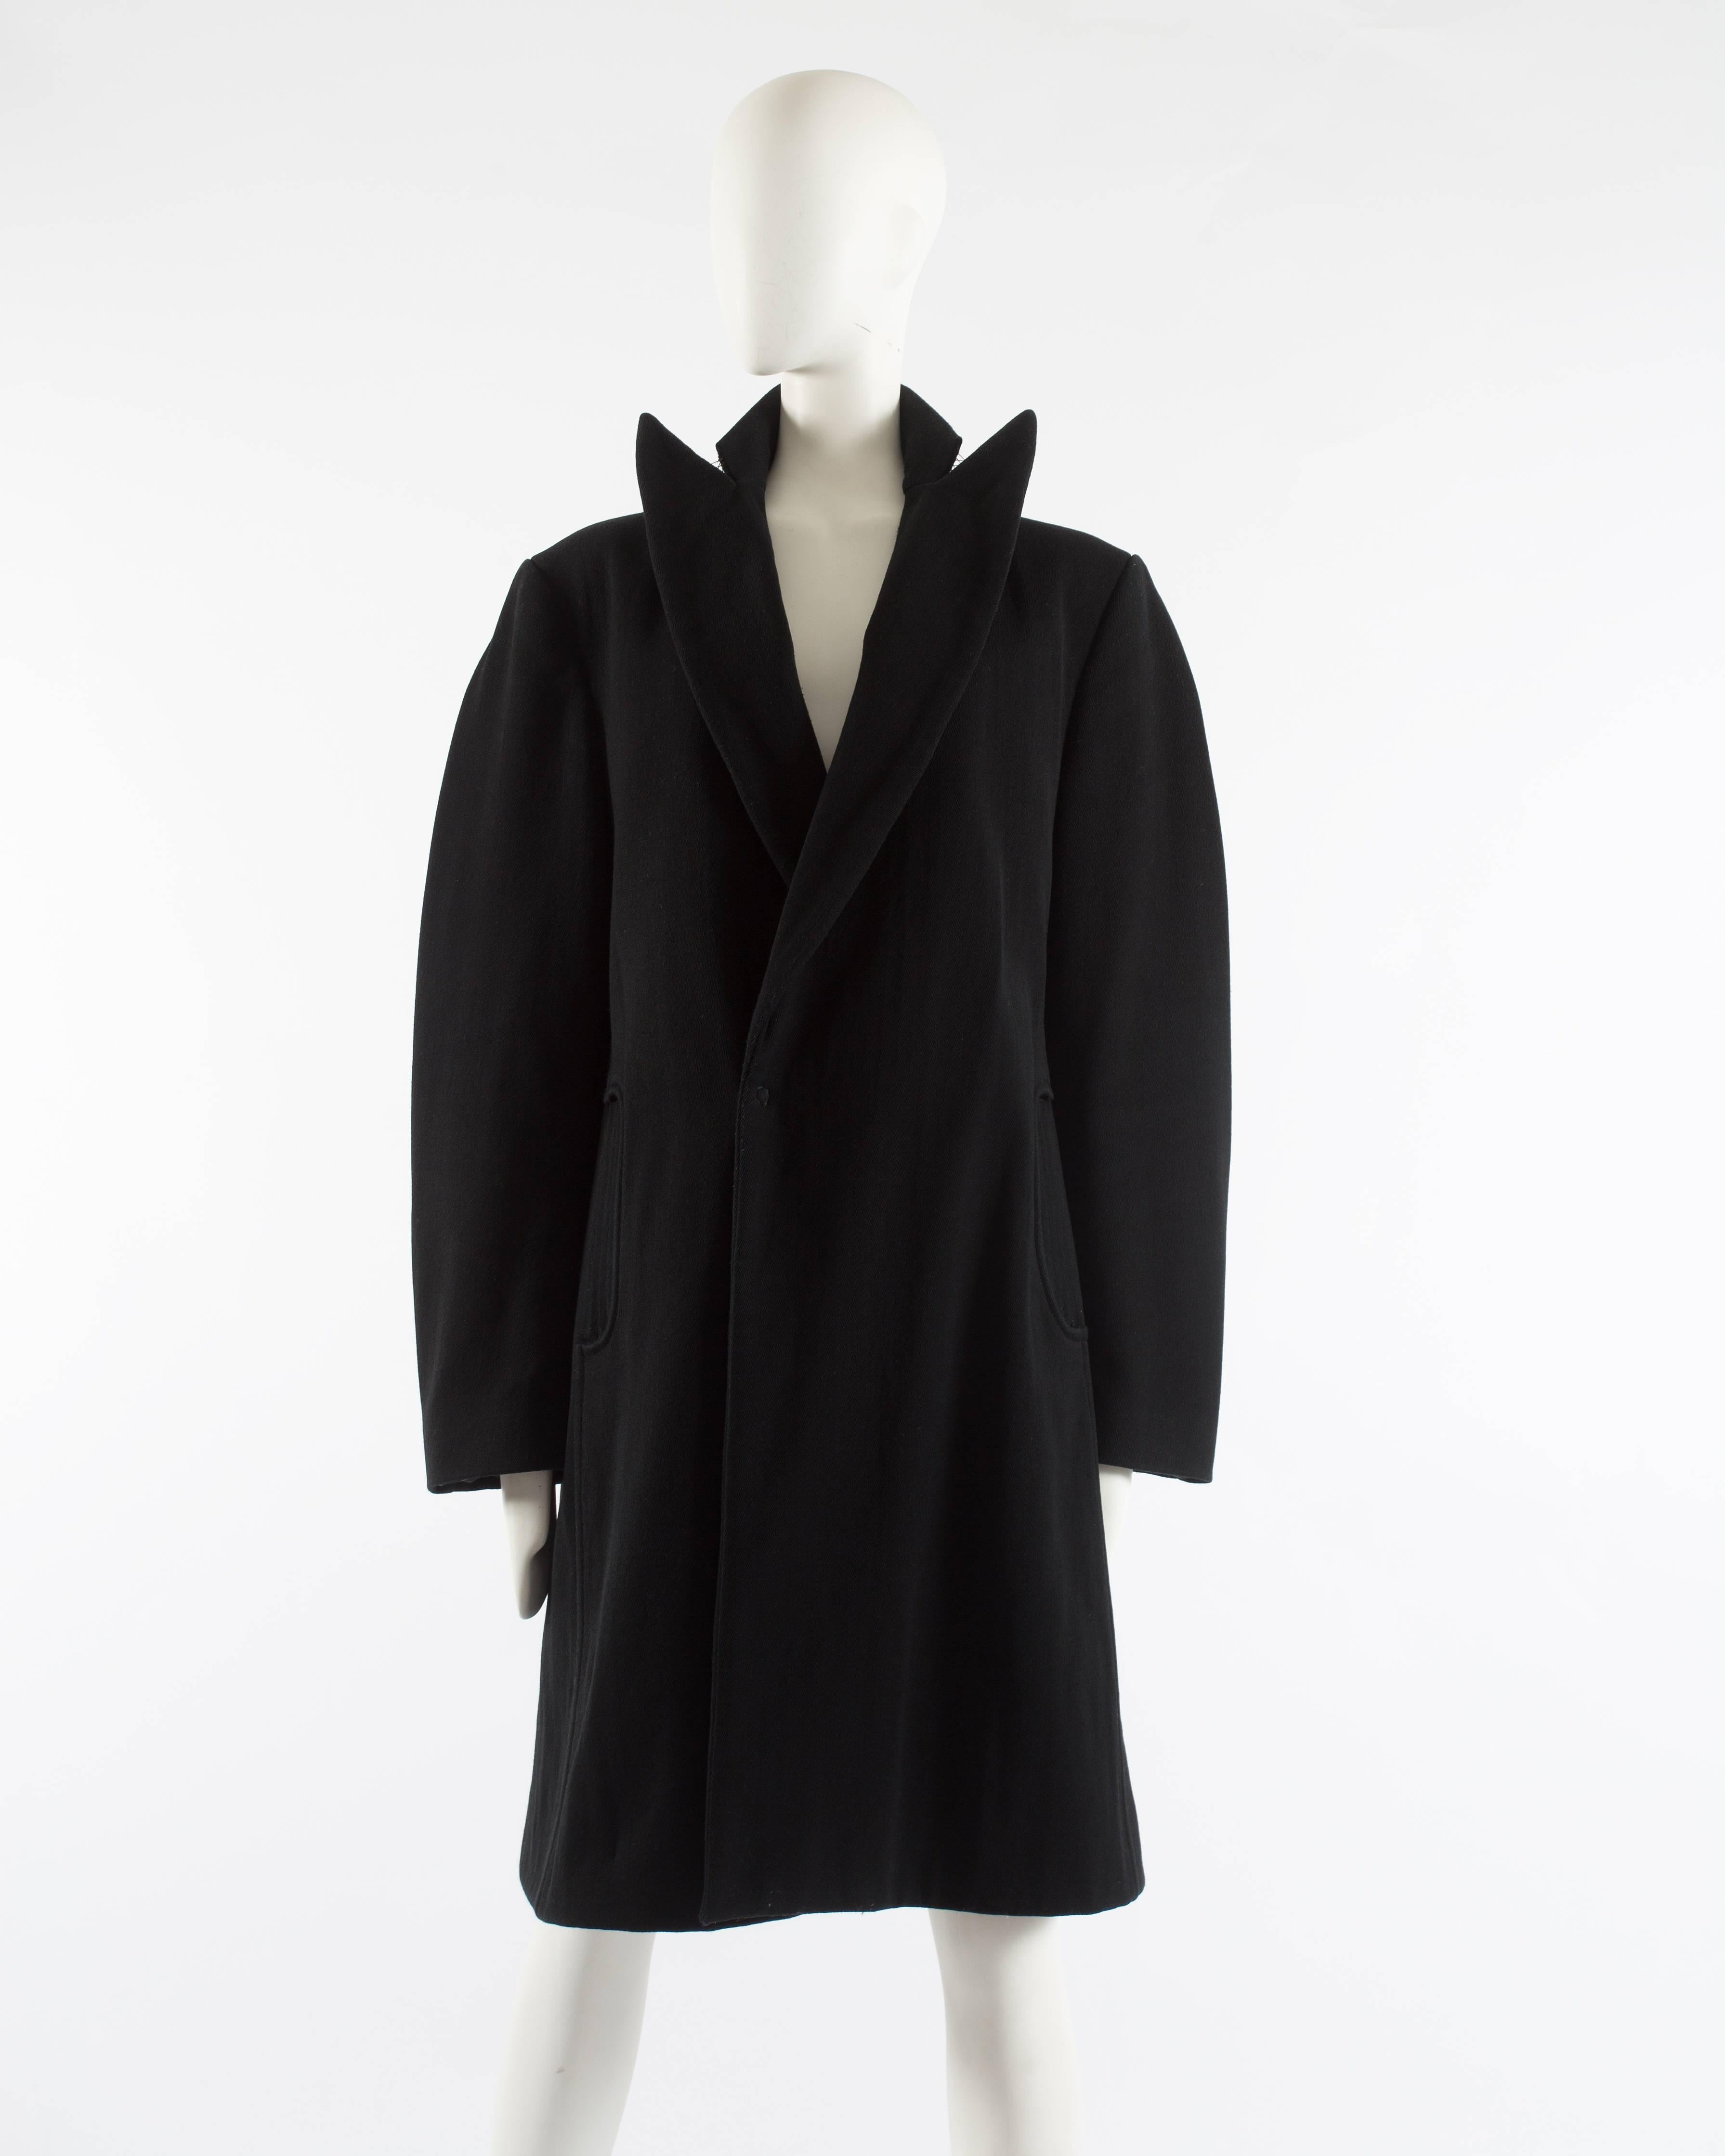 Martin Margiela black wool coat with exaggerated collar, fw 1996 In Excellent Condition For Sale In London, GB